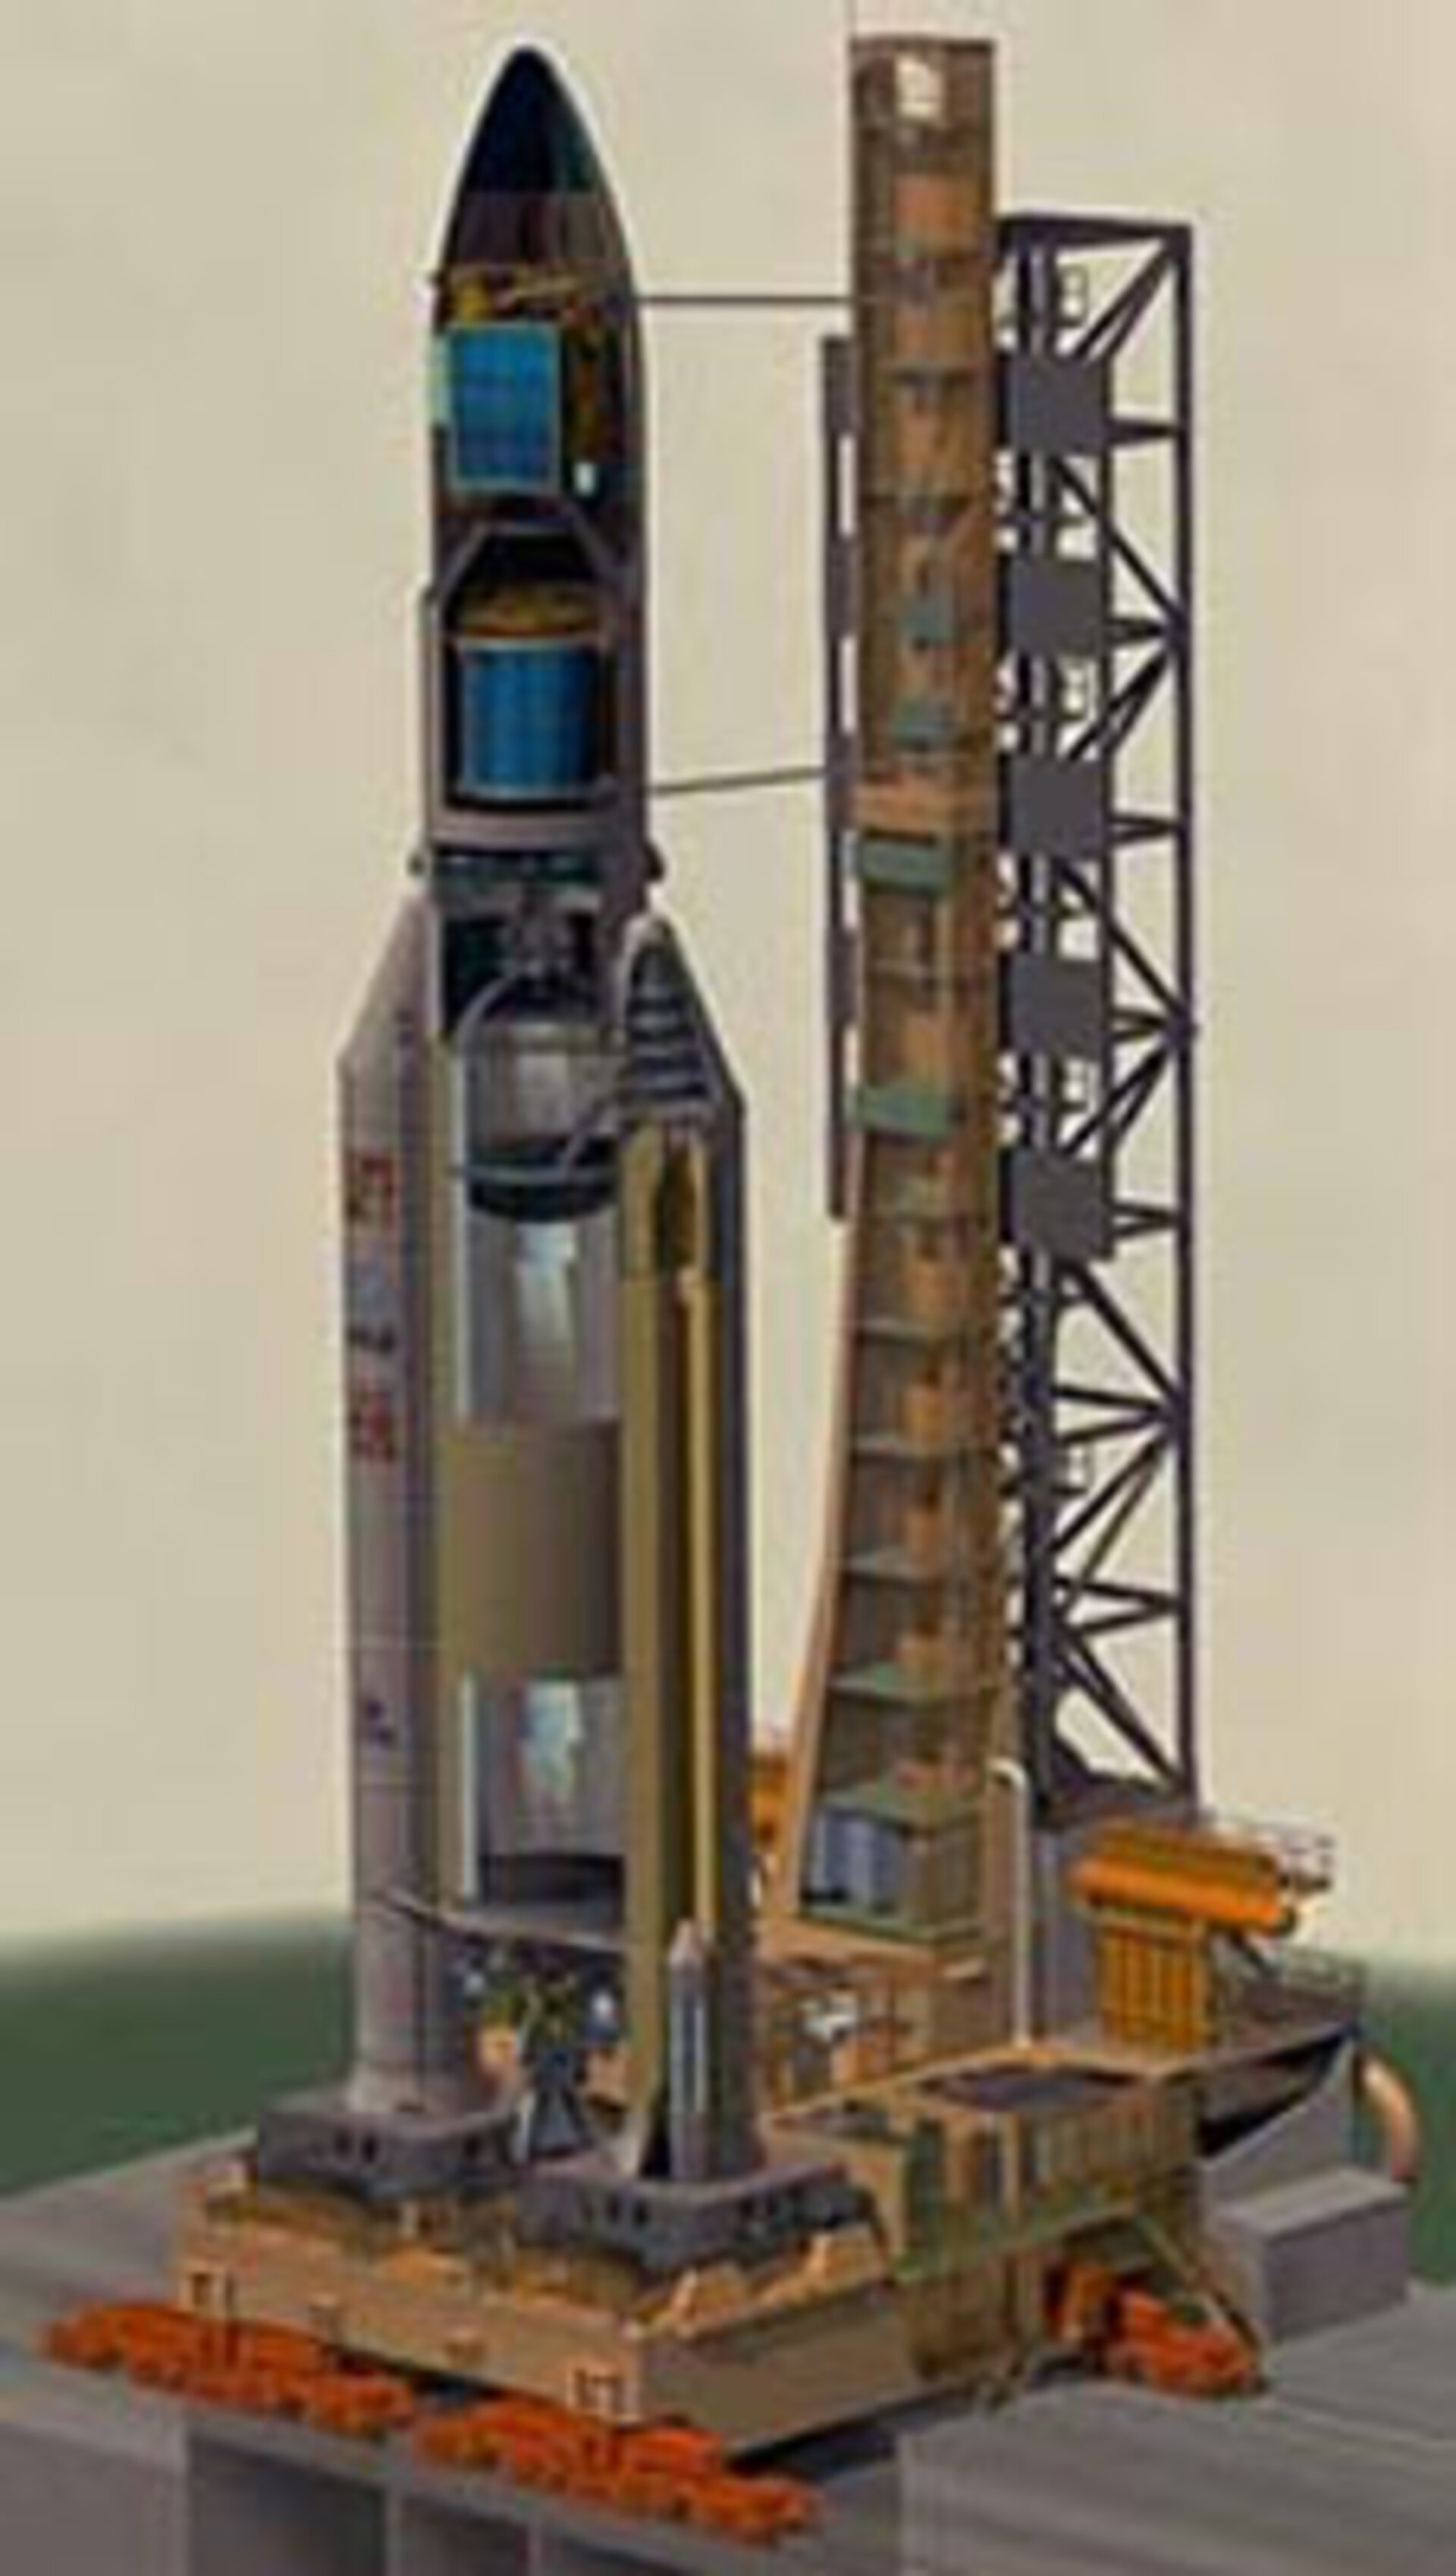 Representation of a launcher on launch pad